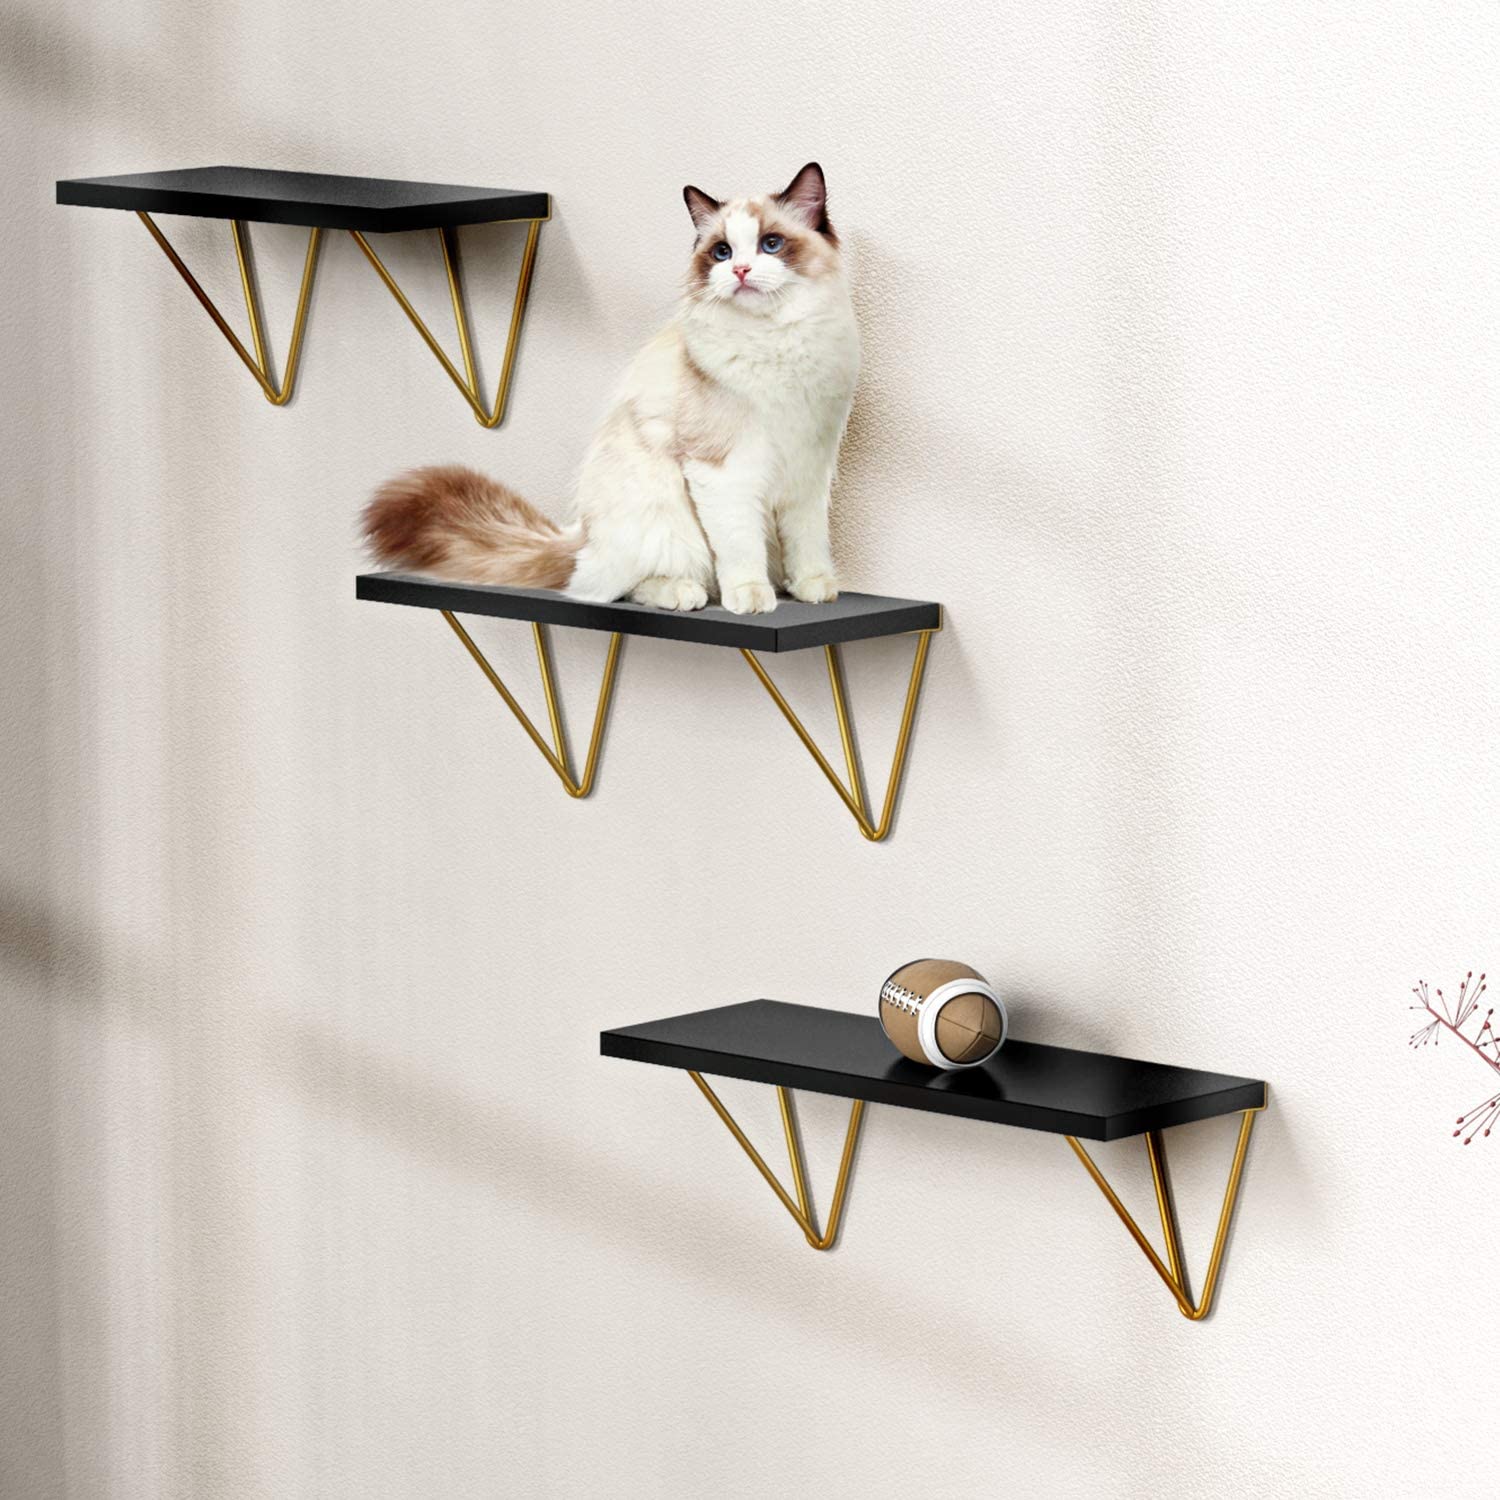 Wall Shelves Set of 3 - Wall Mounted Shelf for Living Room, Bedroom, Kitchen 